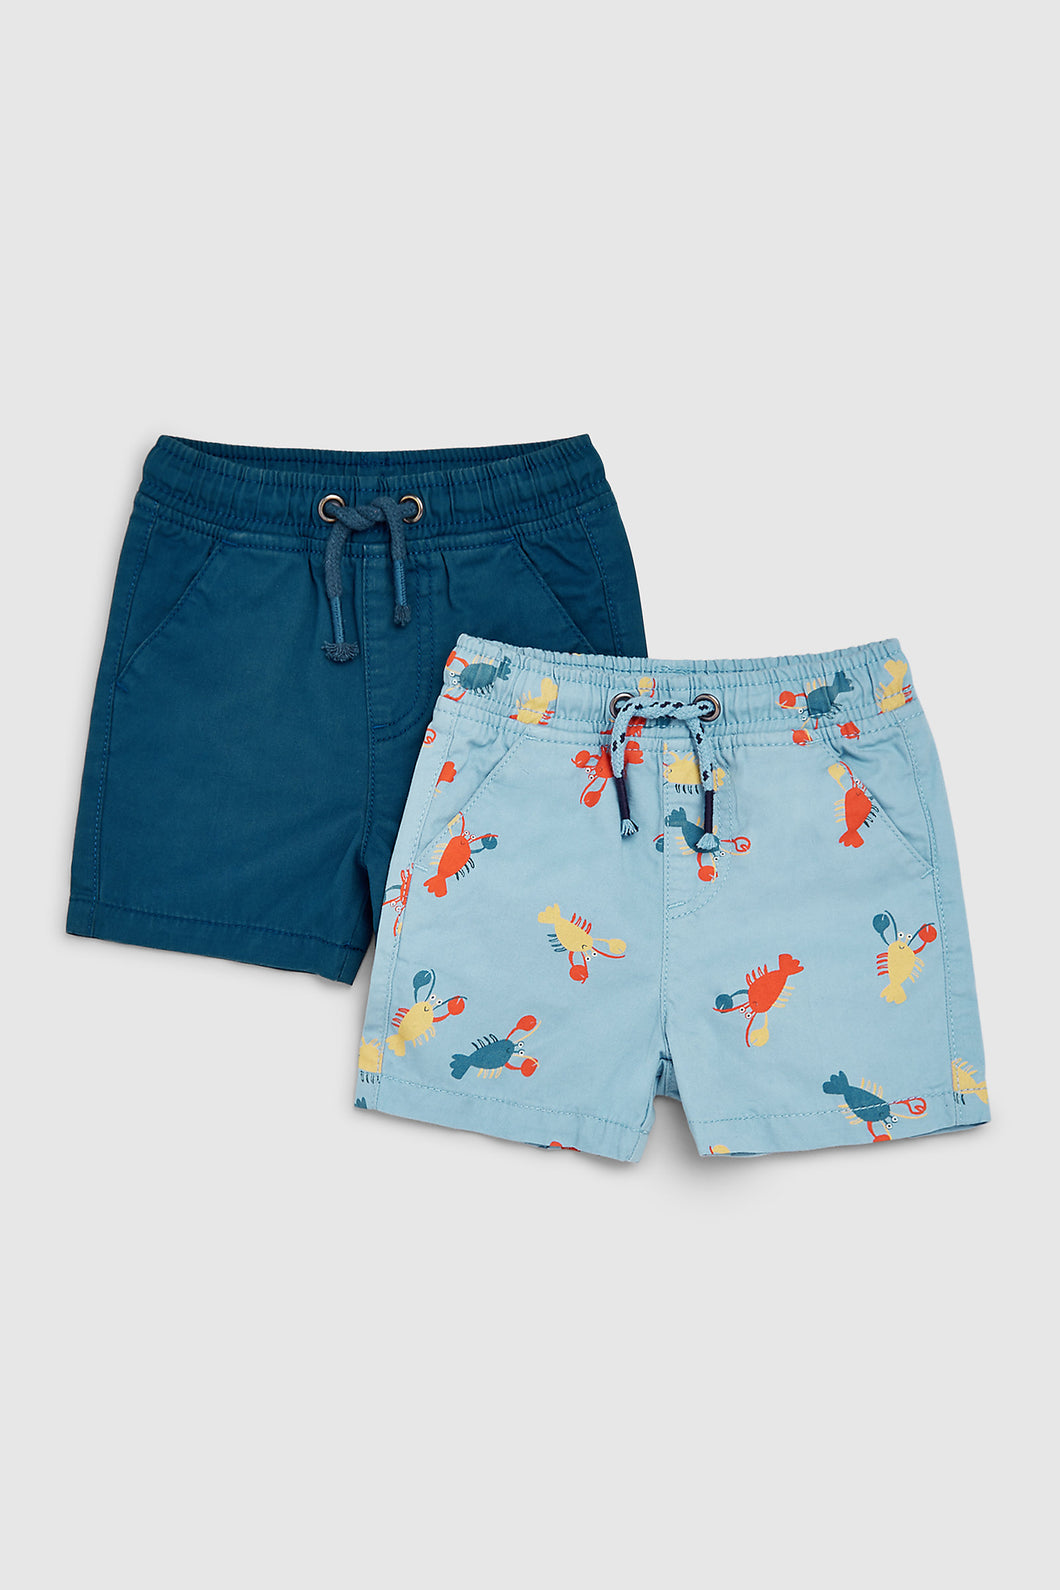 Mothercare Cotton Shorts - 2 Pack